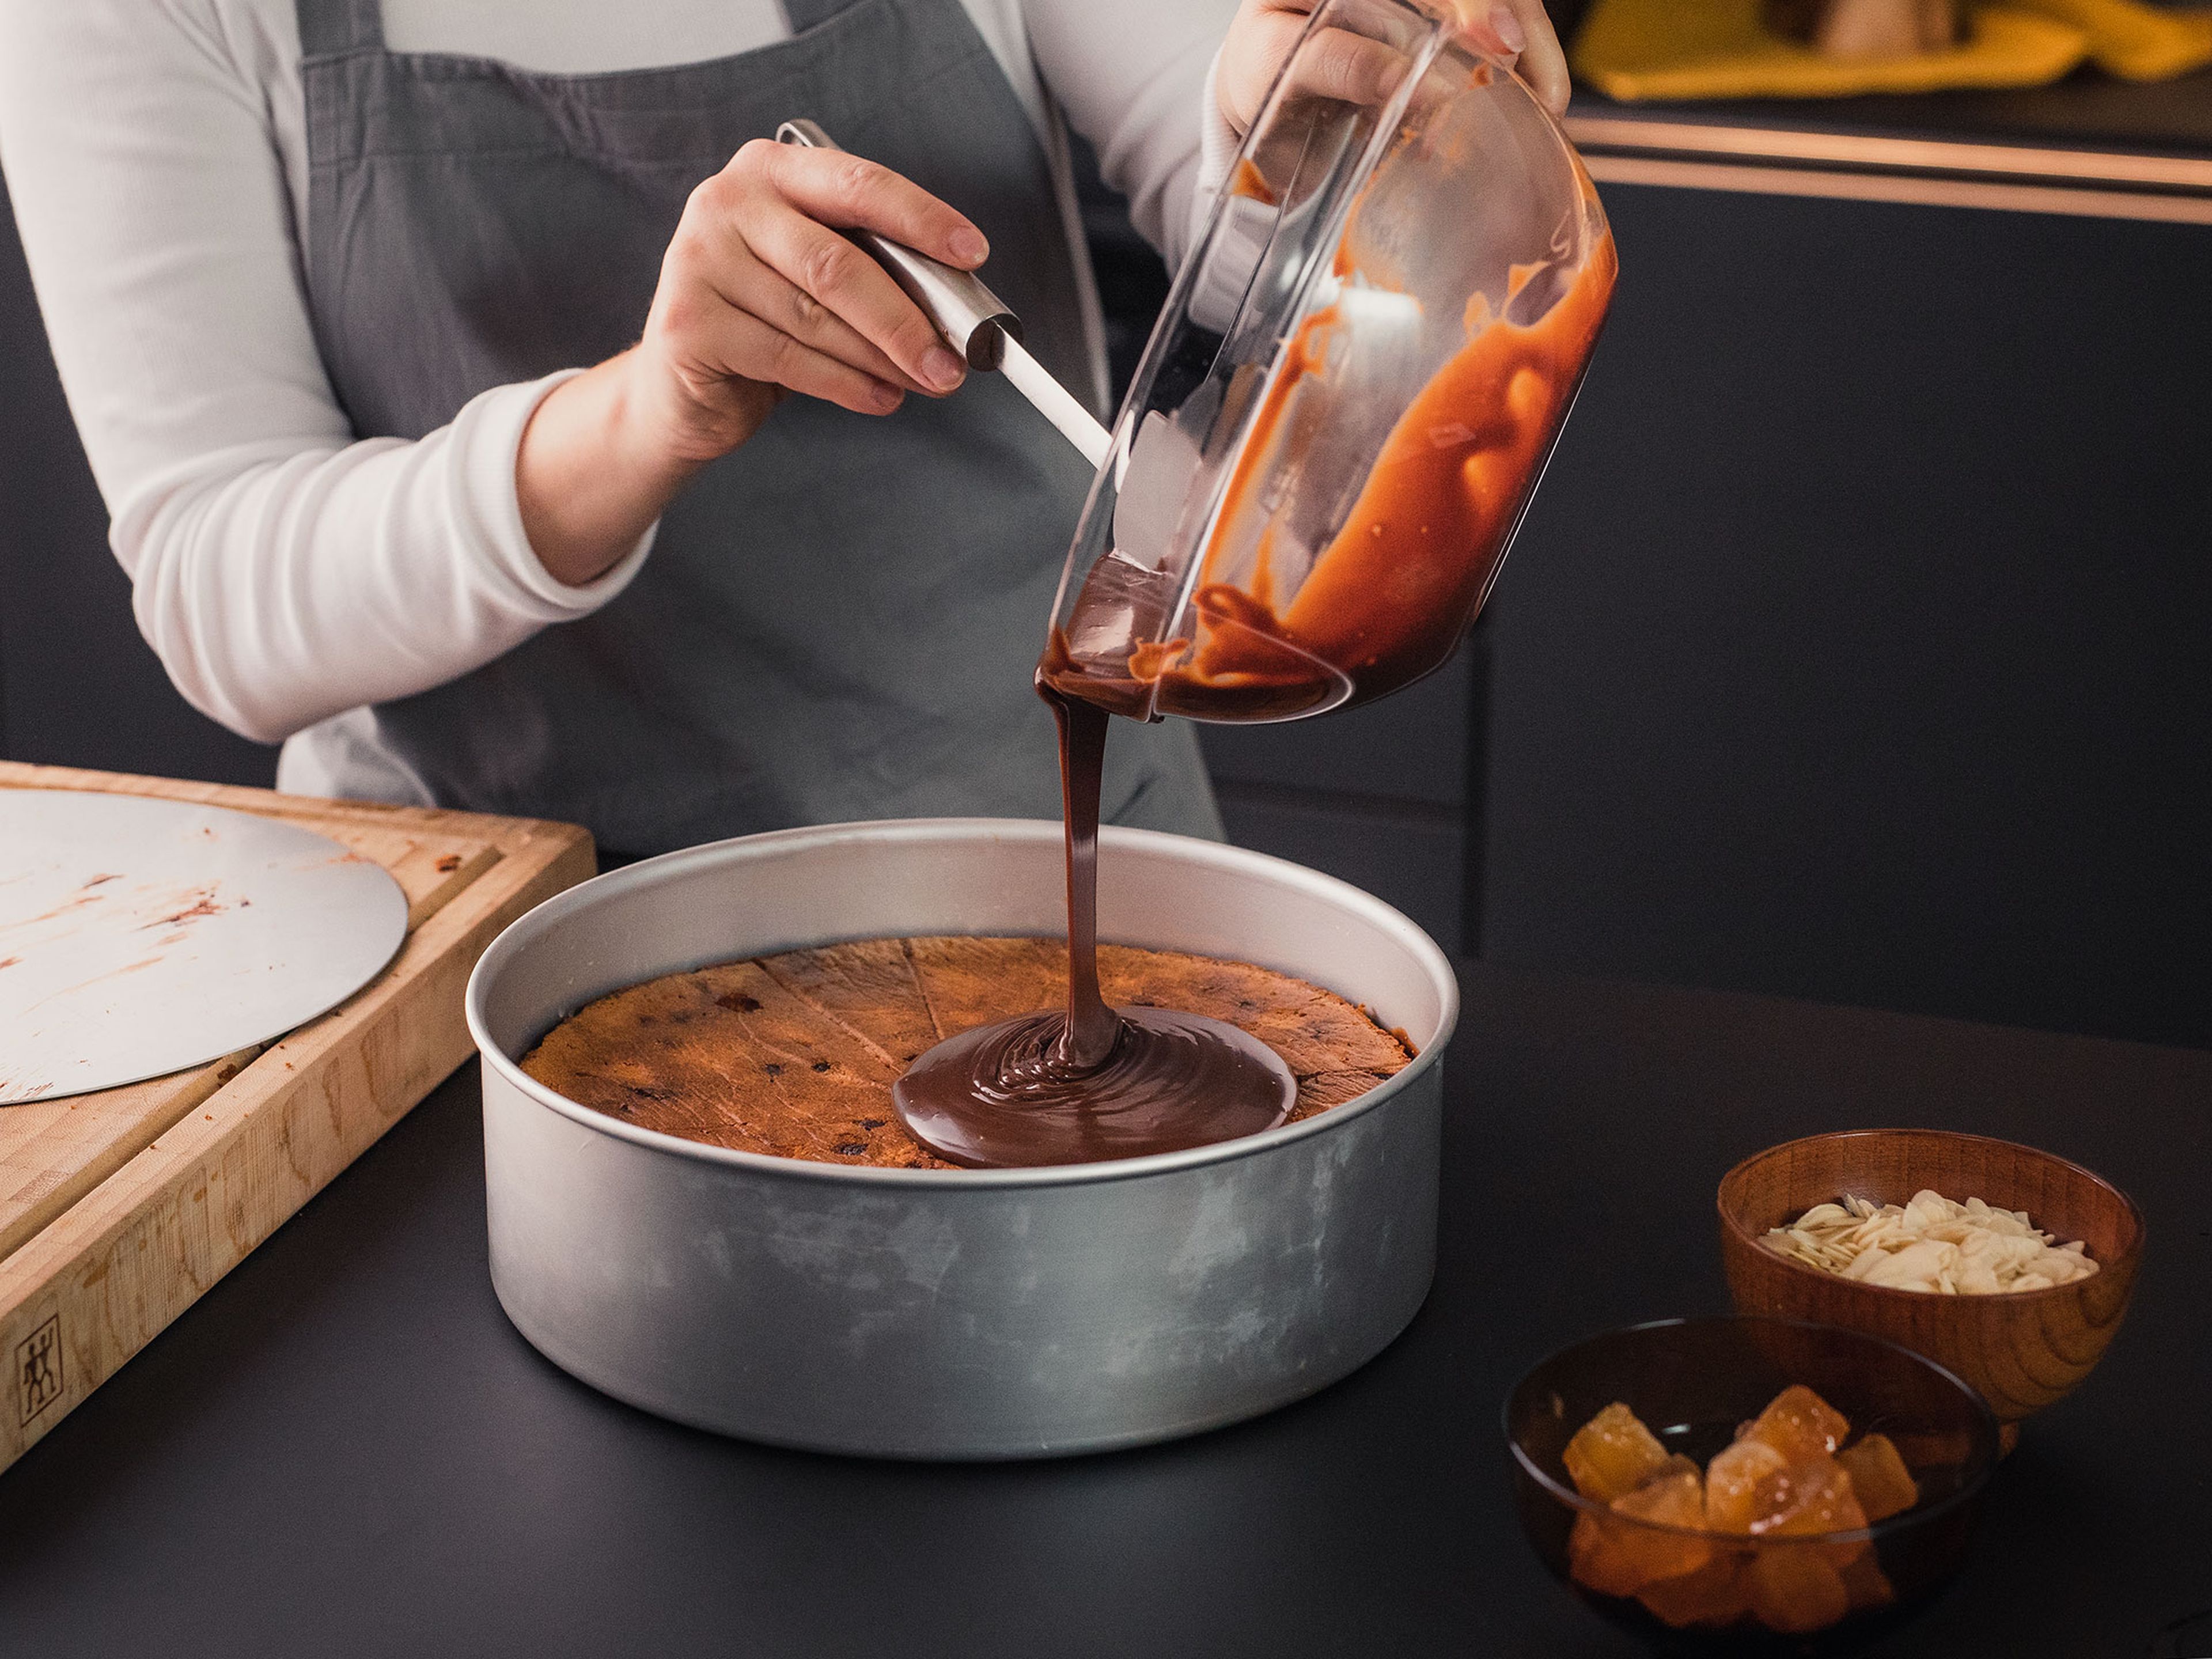 Remove the cooled pumpkin cake from the springform pan with a small knife. Use a serrated knife to halve the cake horizontally. Add one cake half back to the springform pan and drizzle with orange juice.